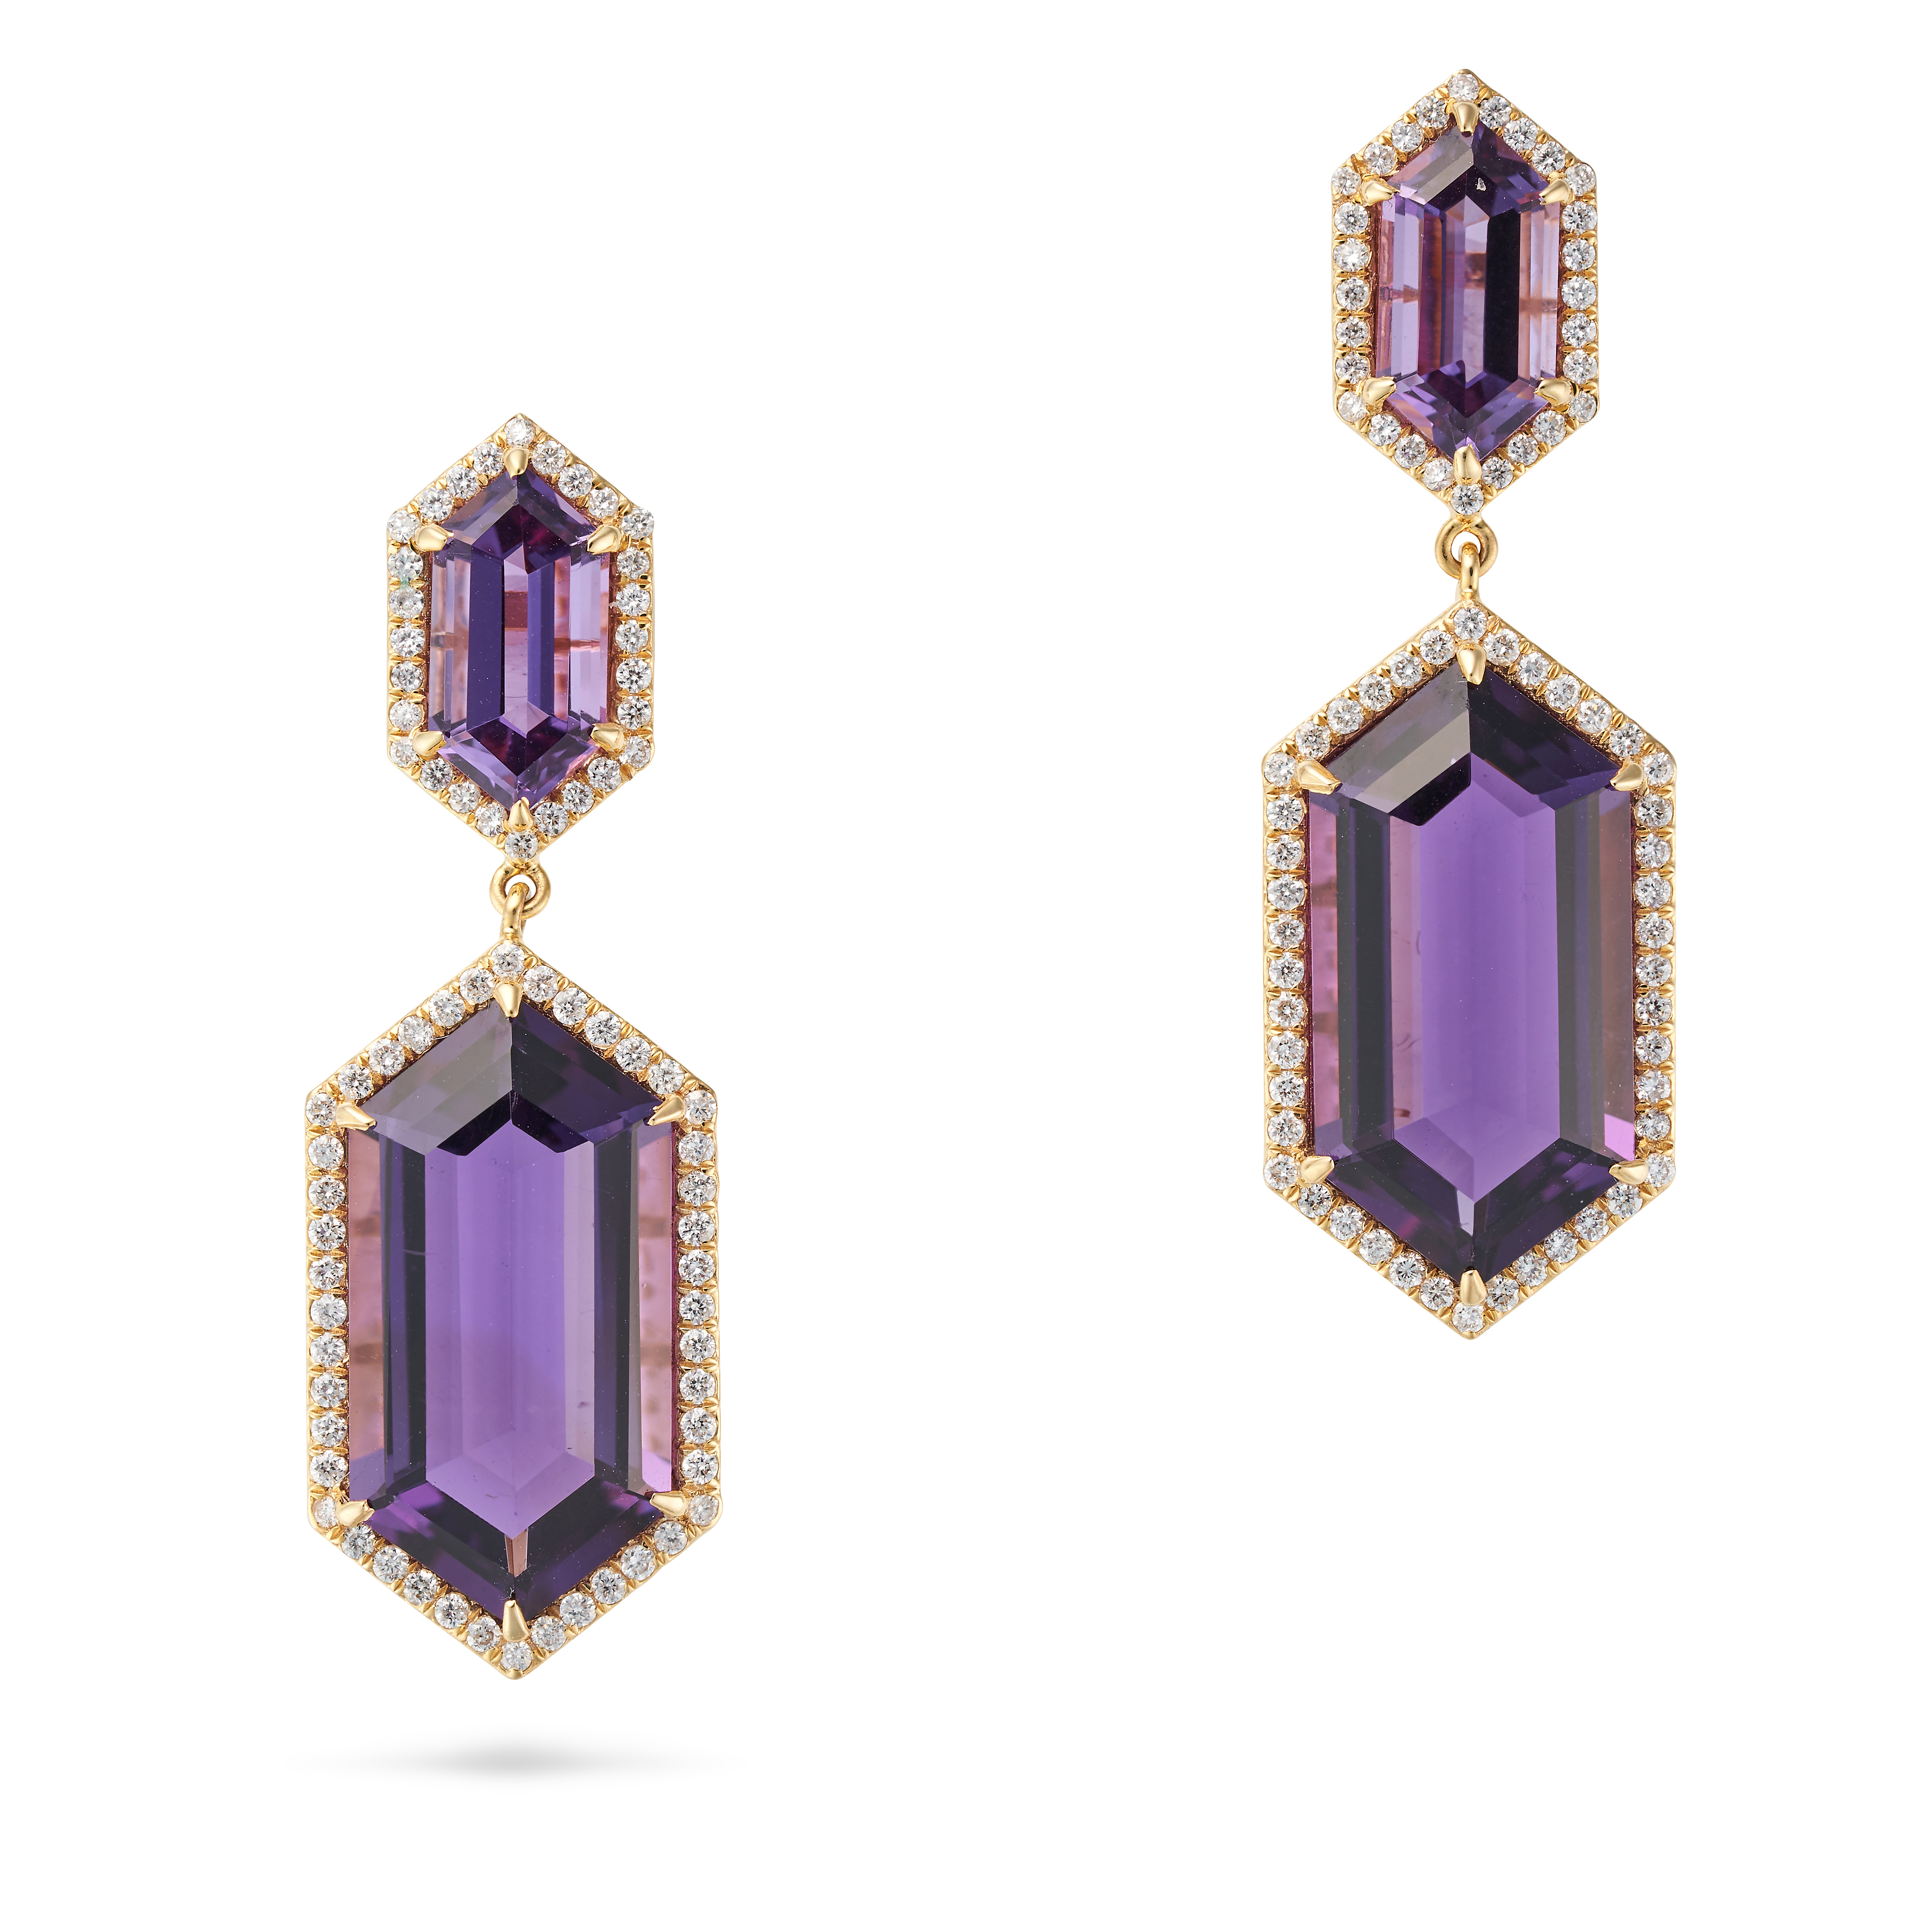 A PAIR OF AMETHYST AND DIAMOND DROP EARRINGS each set with a hexagonal amethyst in a border of ro...